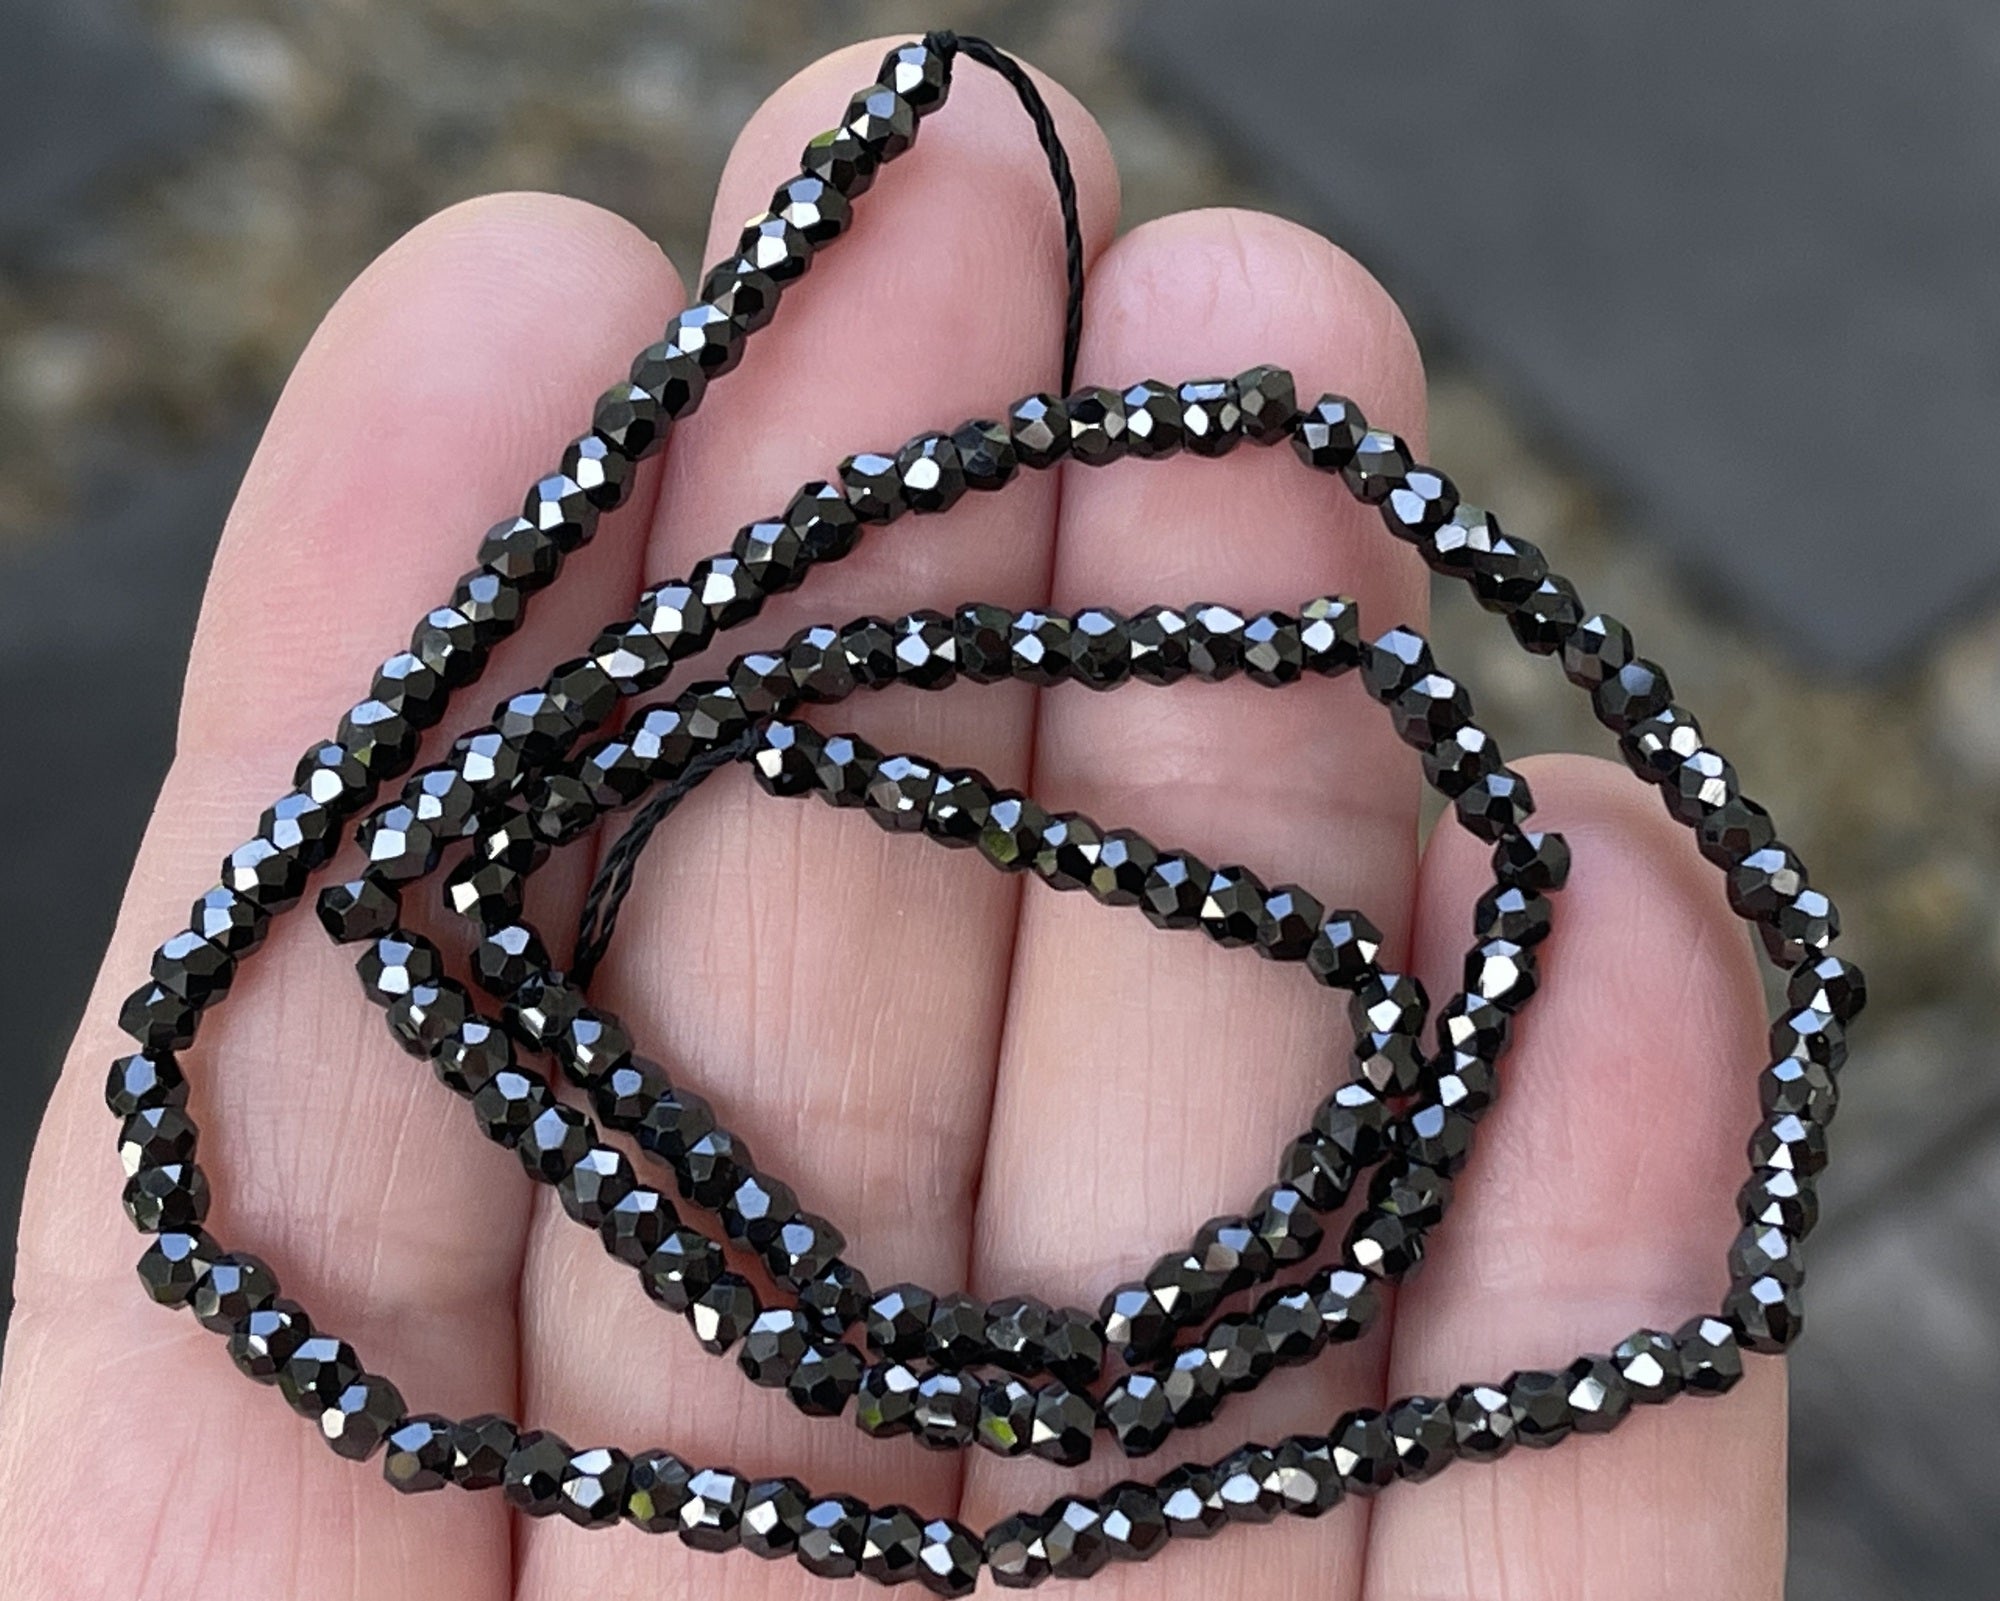 Black Zircon 3x2mm rondelle micro faceted sparkling CZ beads 15" strand